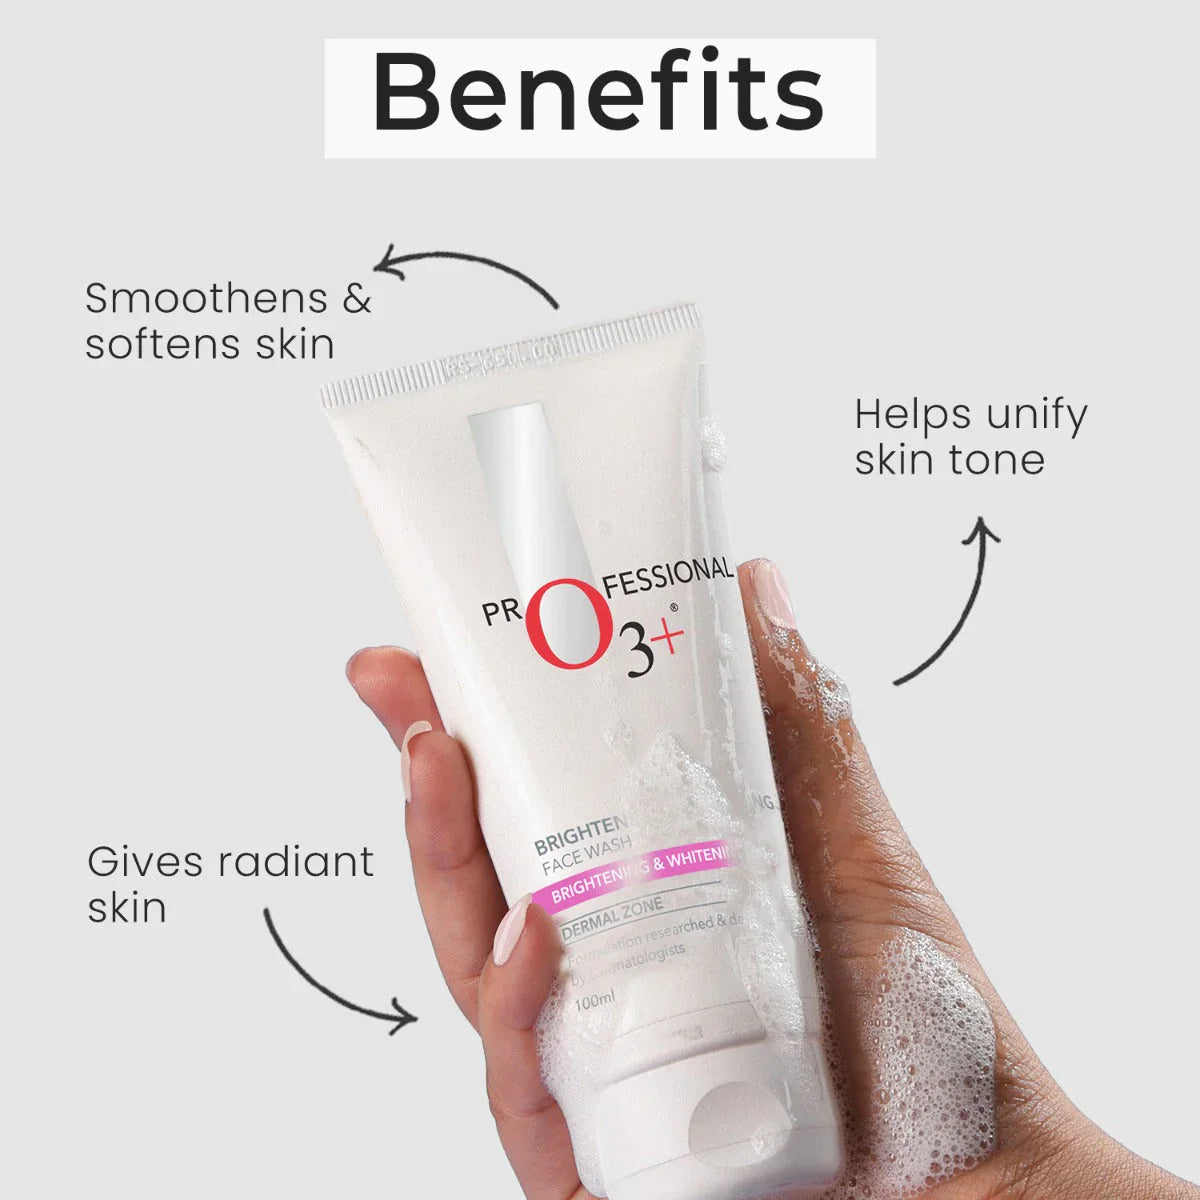 O3+ Brightening & Whitening Face Wash for Radiant Skin, 50g face wash from O3+